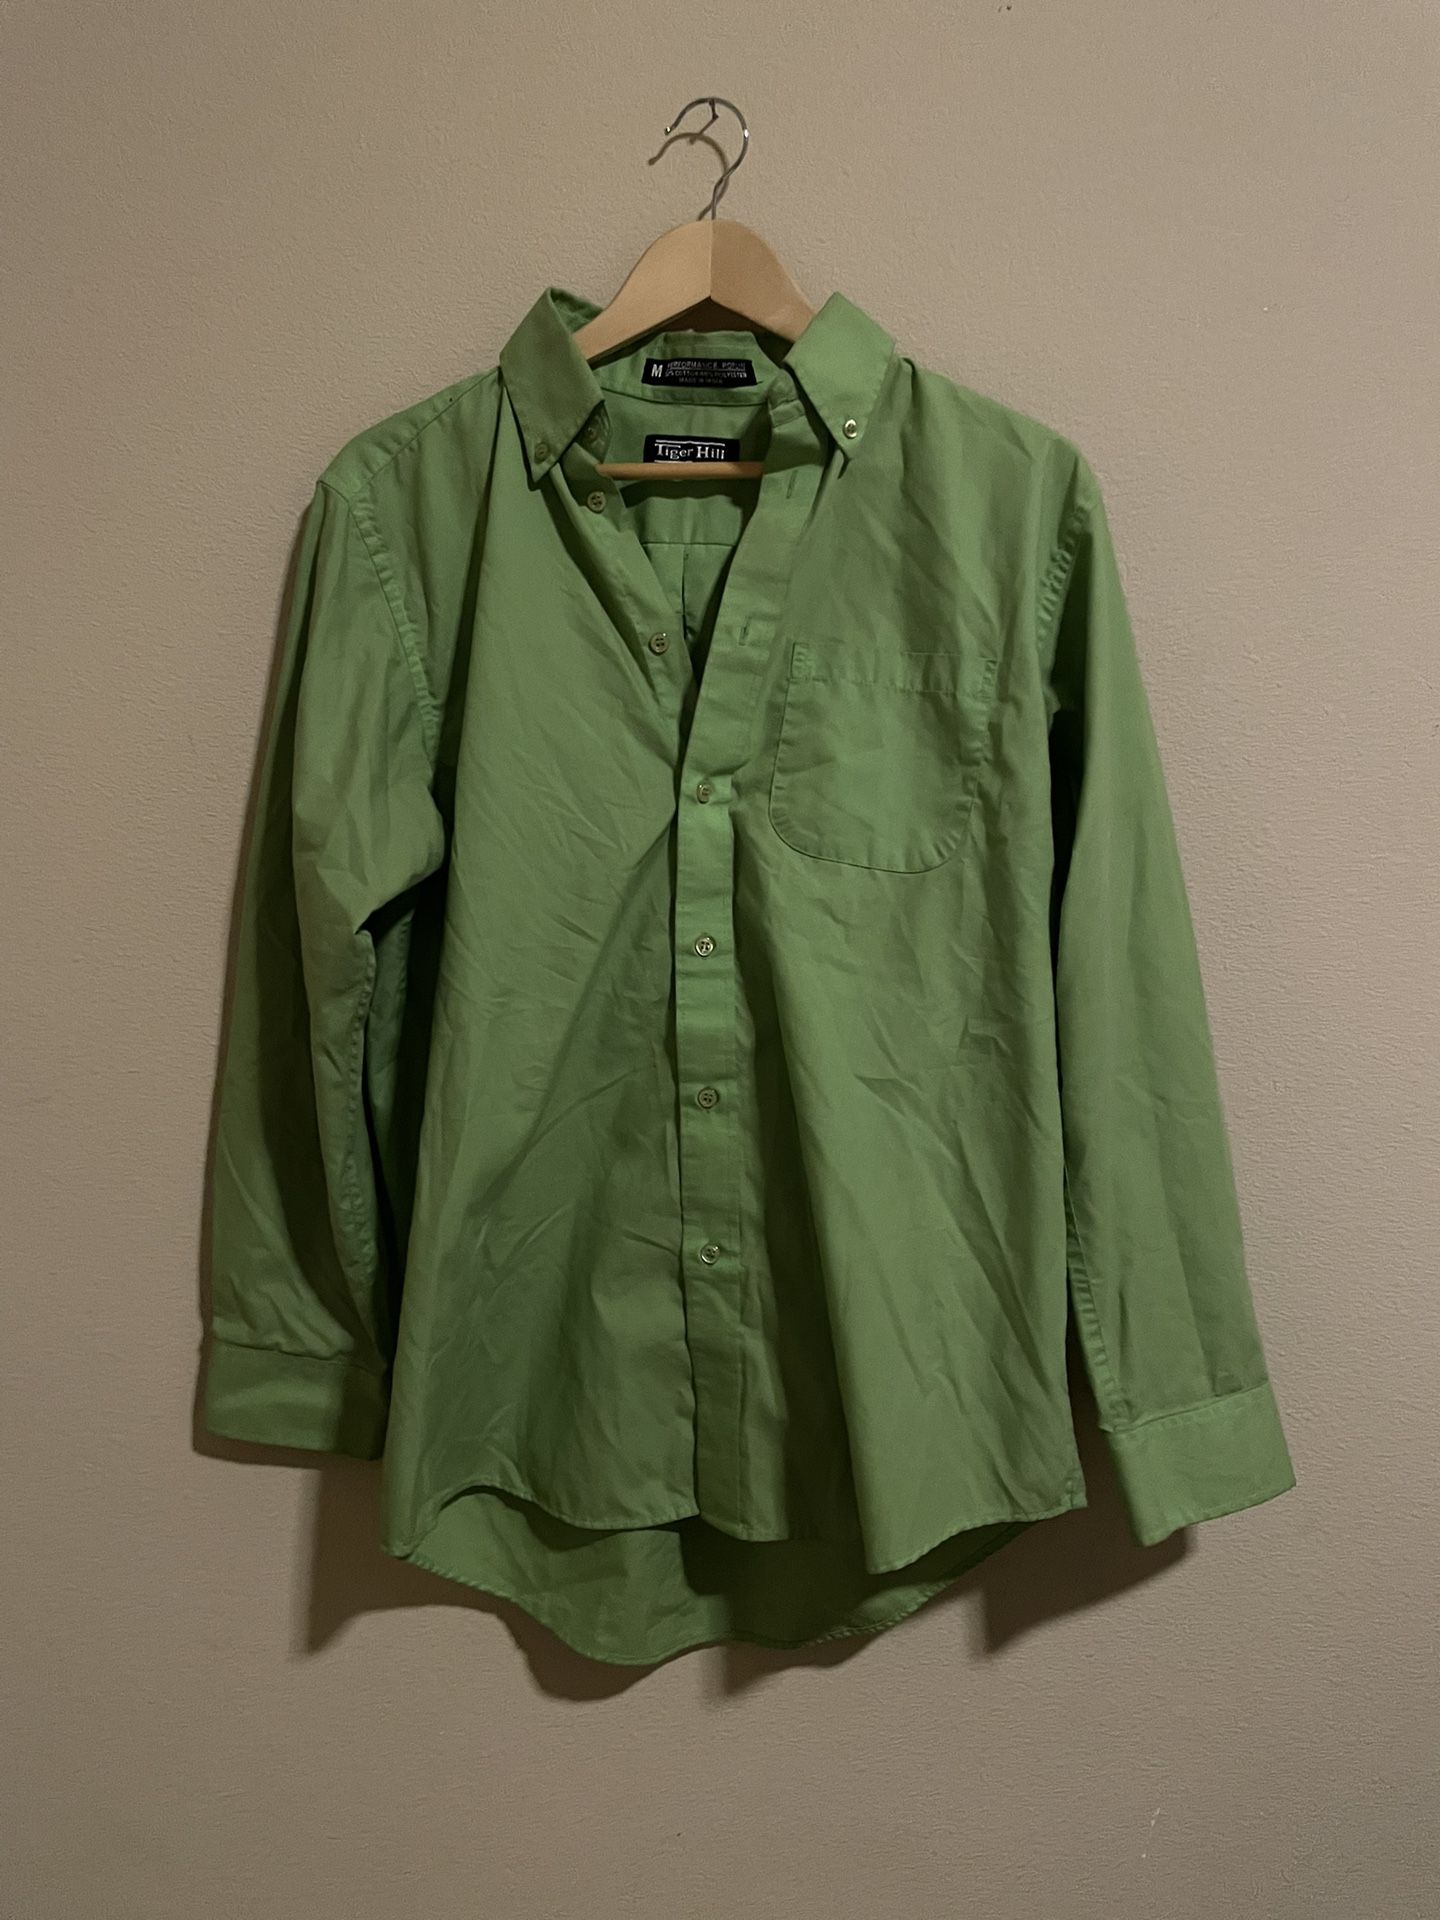 Men’s Dress Shirts for Sale in Baytown, TX - OfferUp